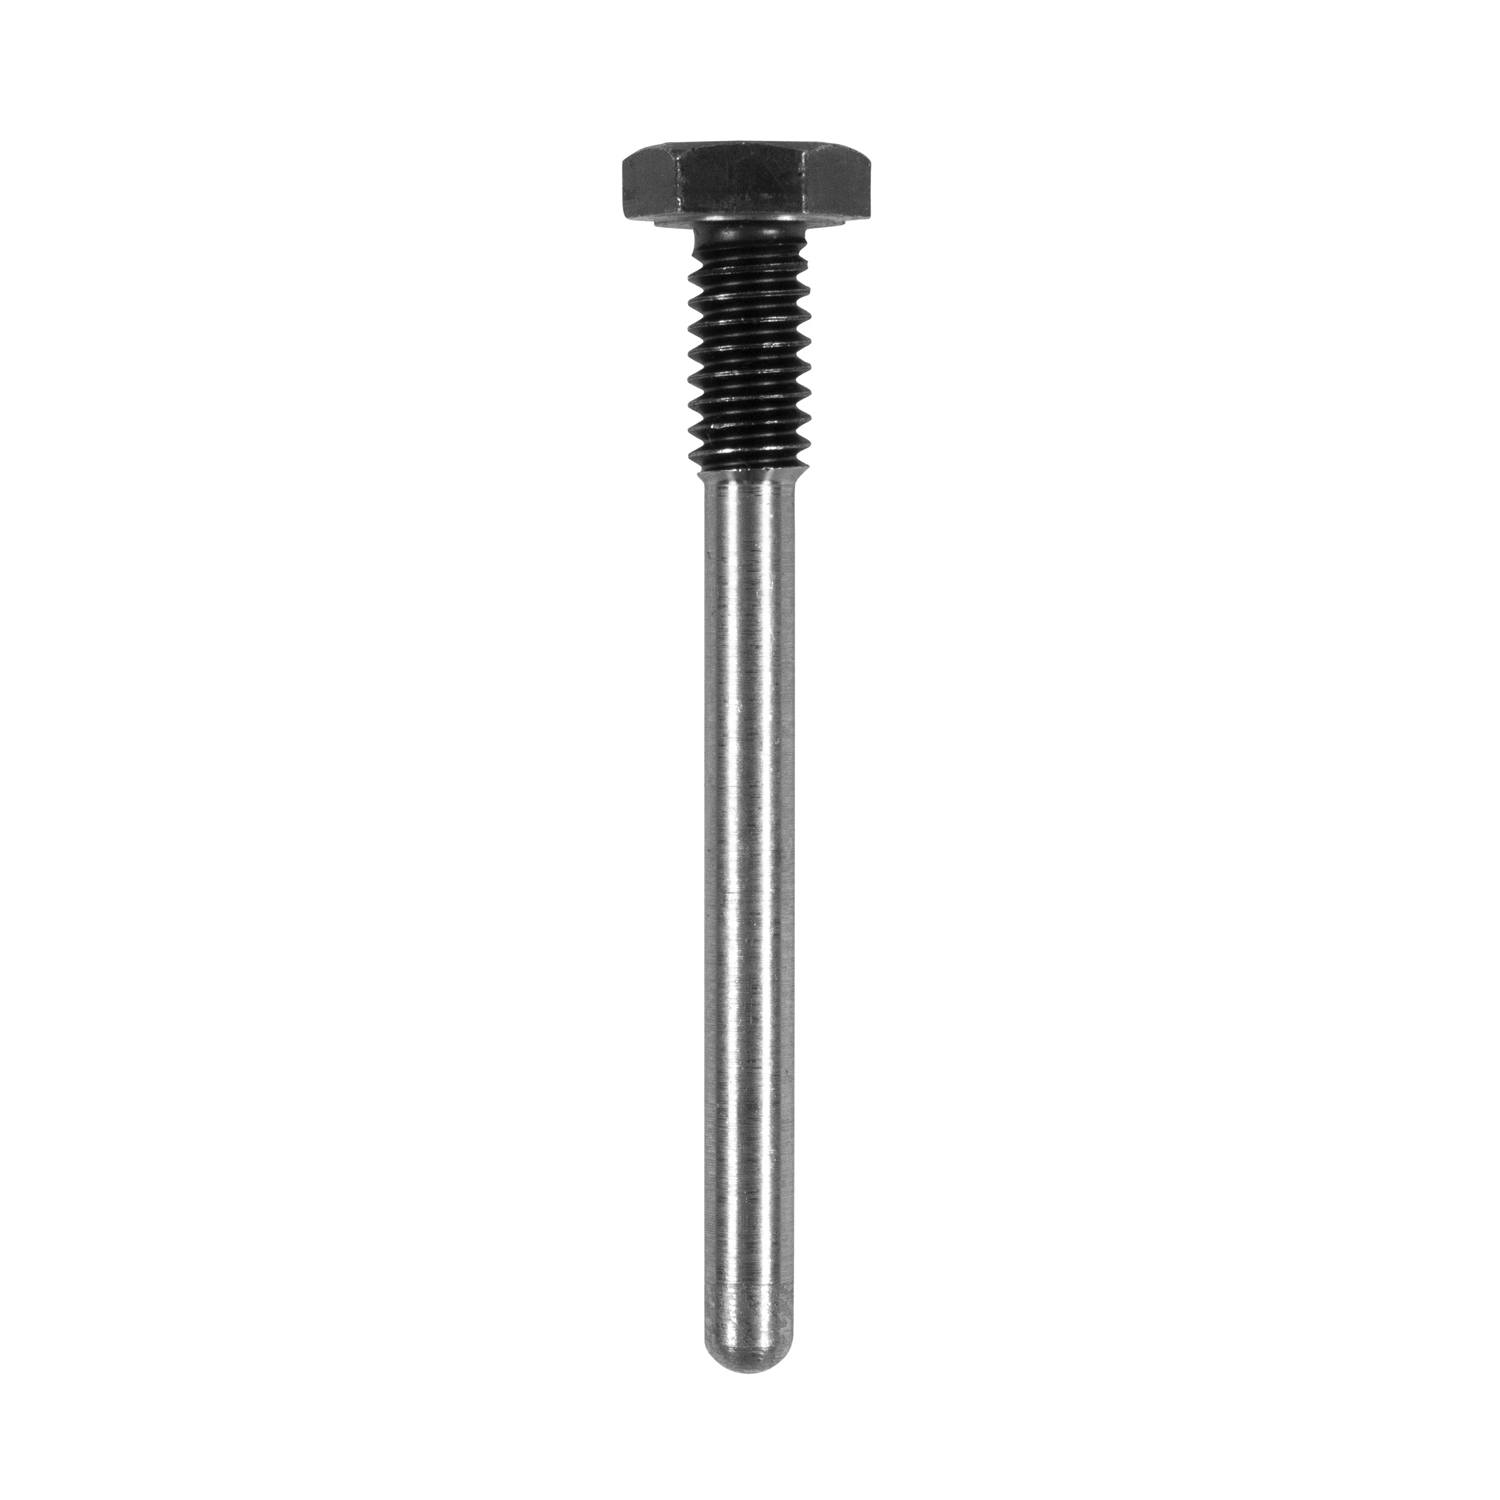 positraction cross pin bolt for for 8.2" GM and Cast Iron Corvette. 